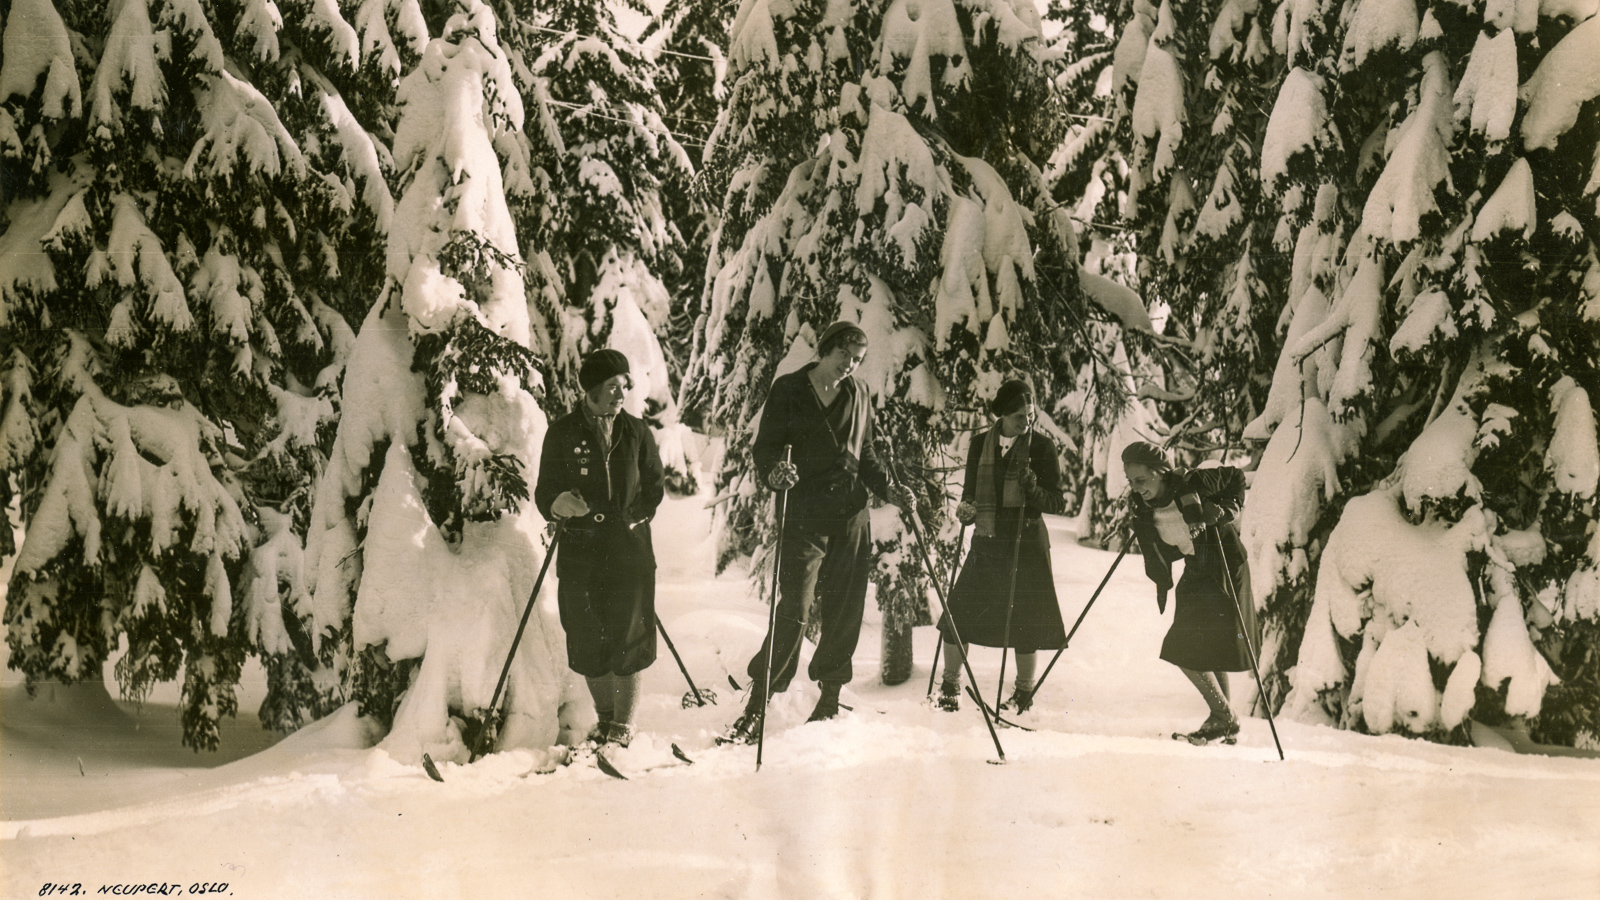 Girlfriends skiing under snow-covered trees, 1920